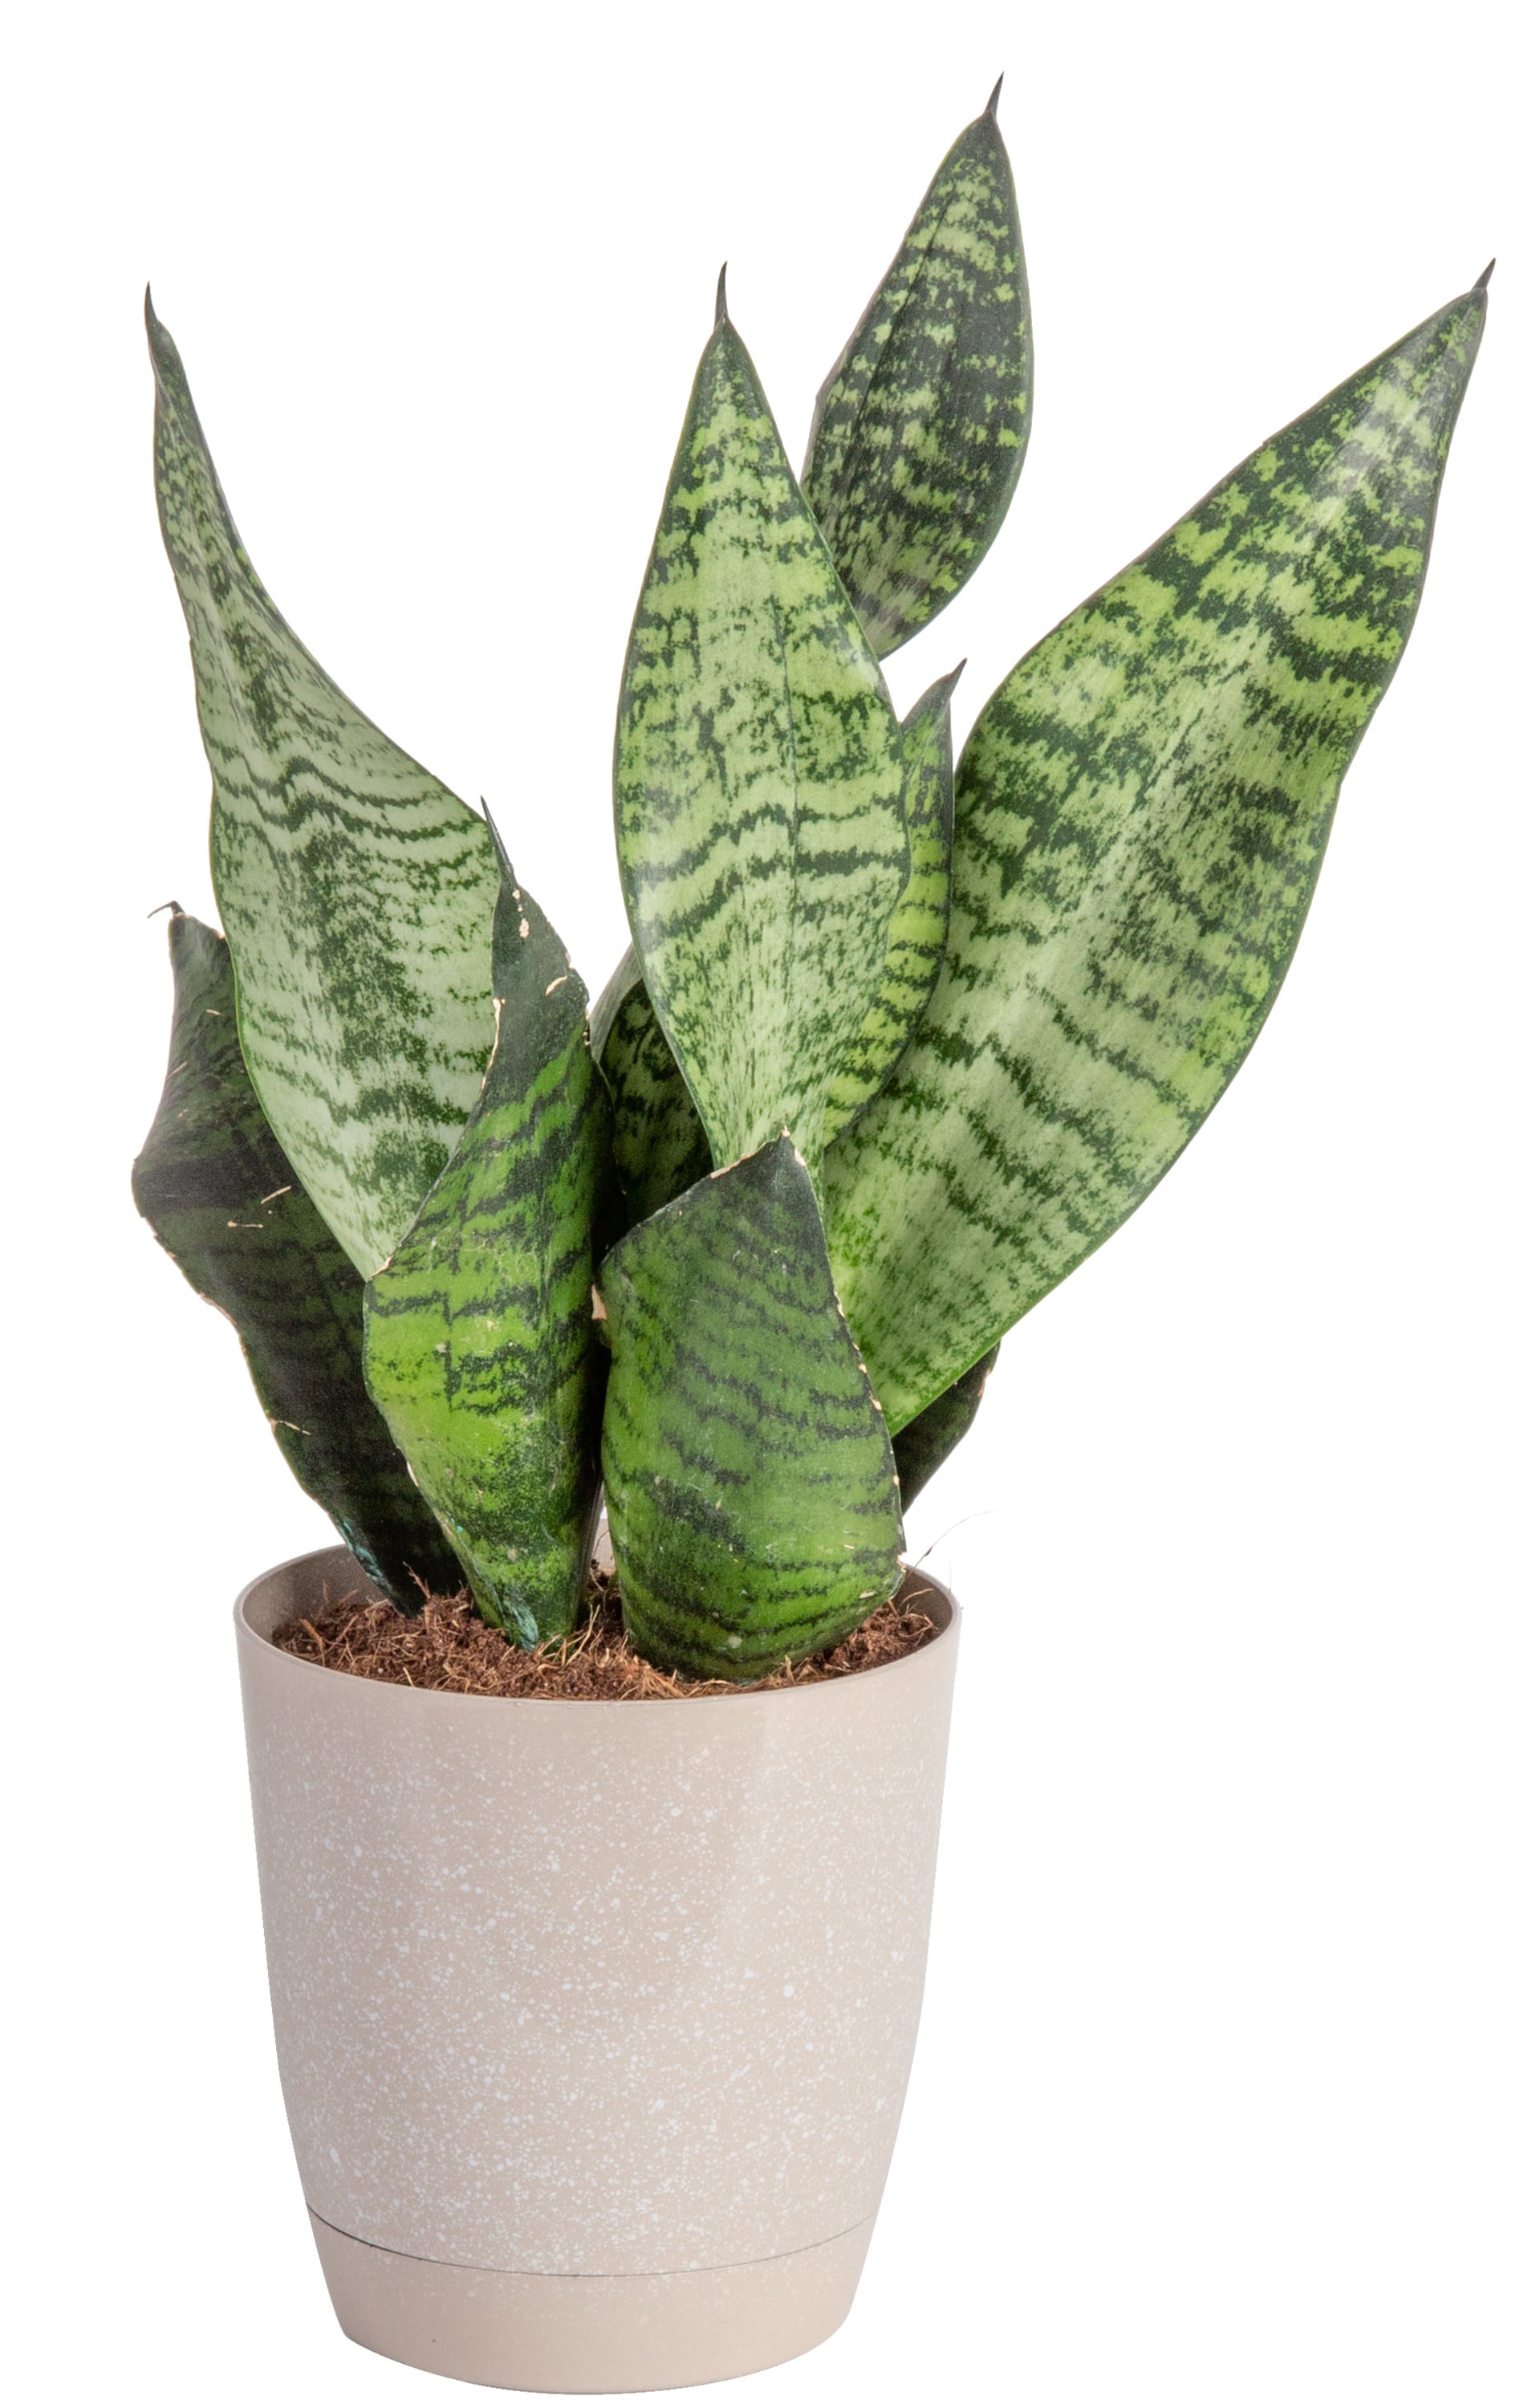 Costa Farms Snake Plant House Plant in 4-in Pot in the House Plants at Lowes.com